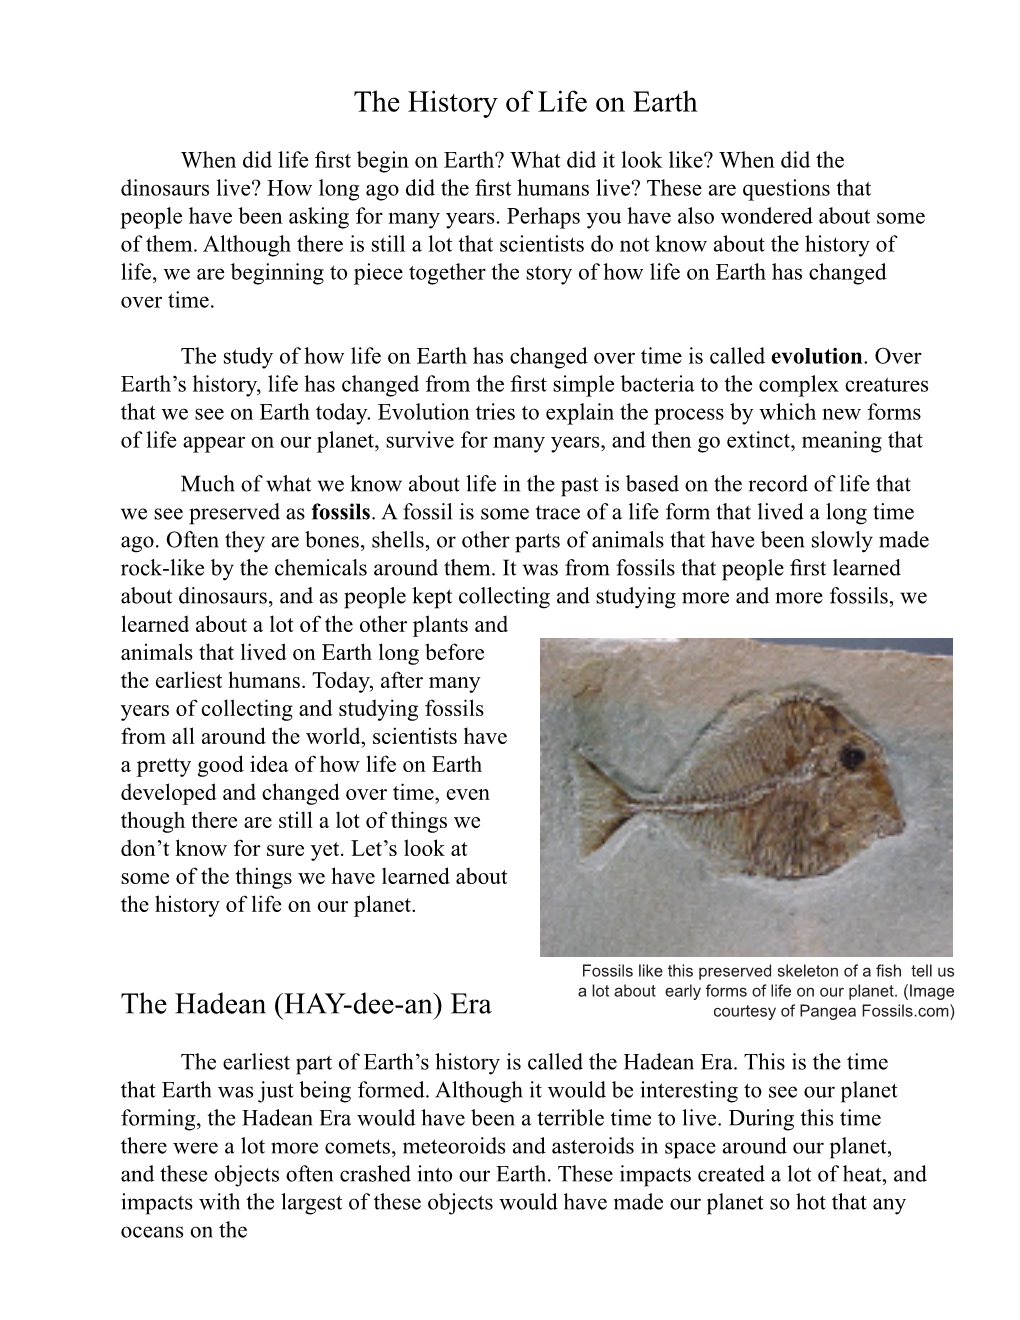 The History of Life on Earth the Hadean (HAY-Dee-An)